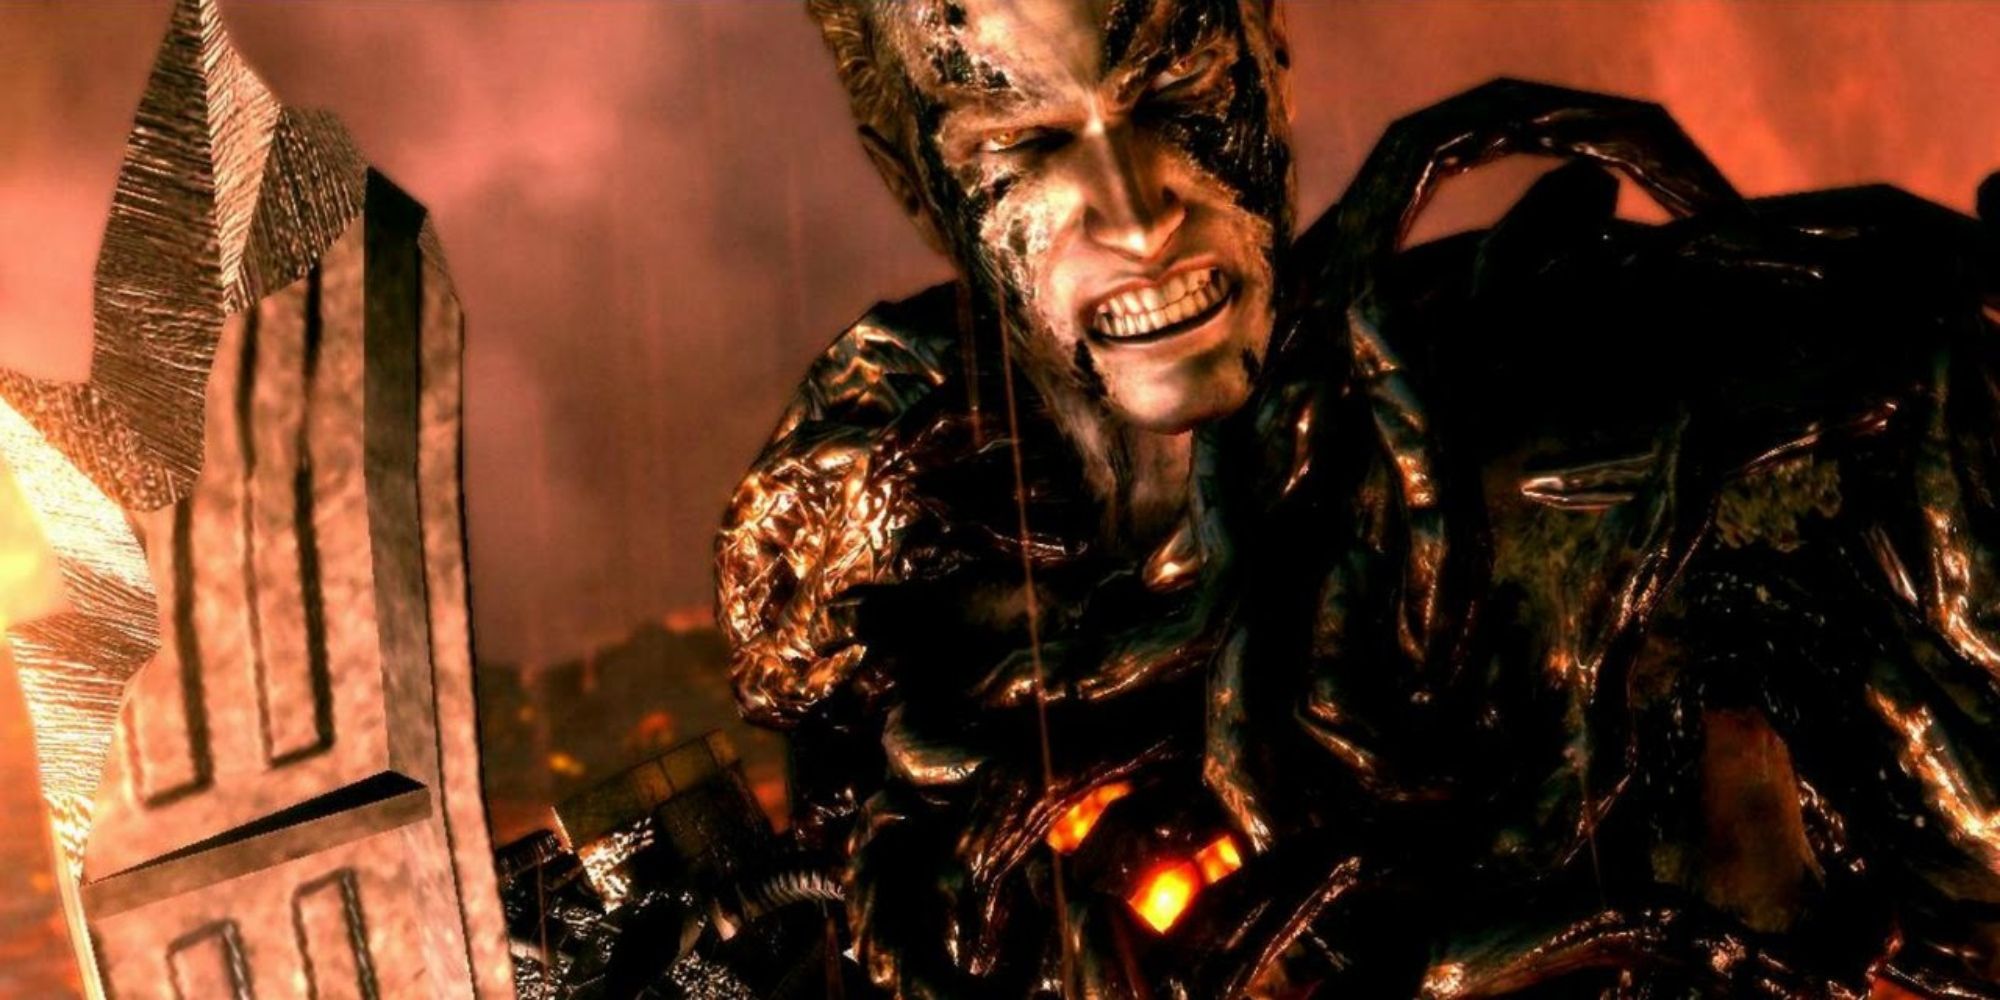 Resident Evil 5 Screenshot Of Albert Wesker Infected With Uroboros At End